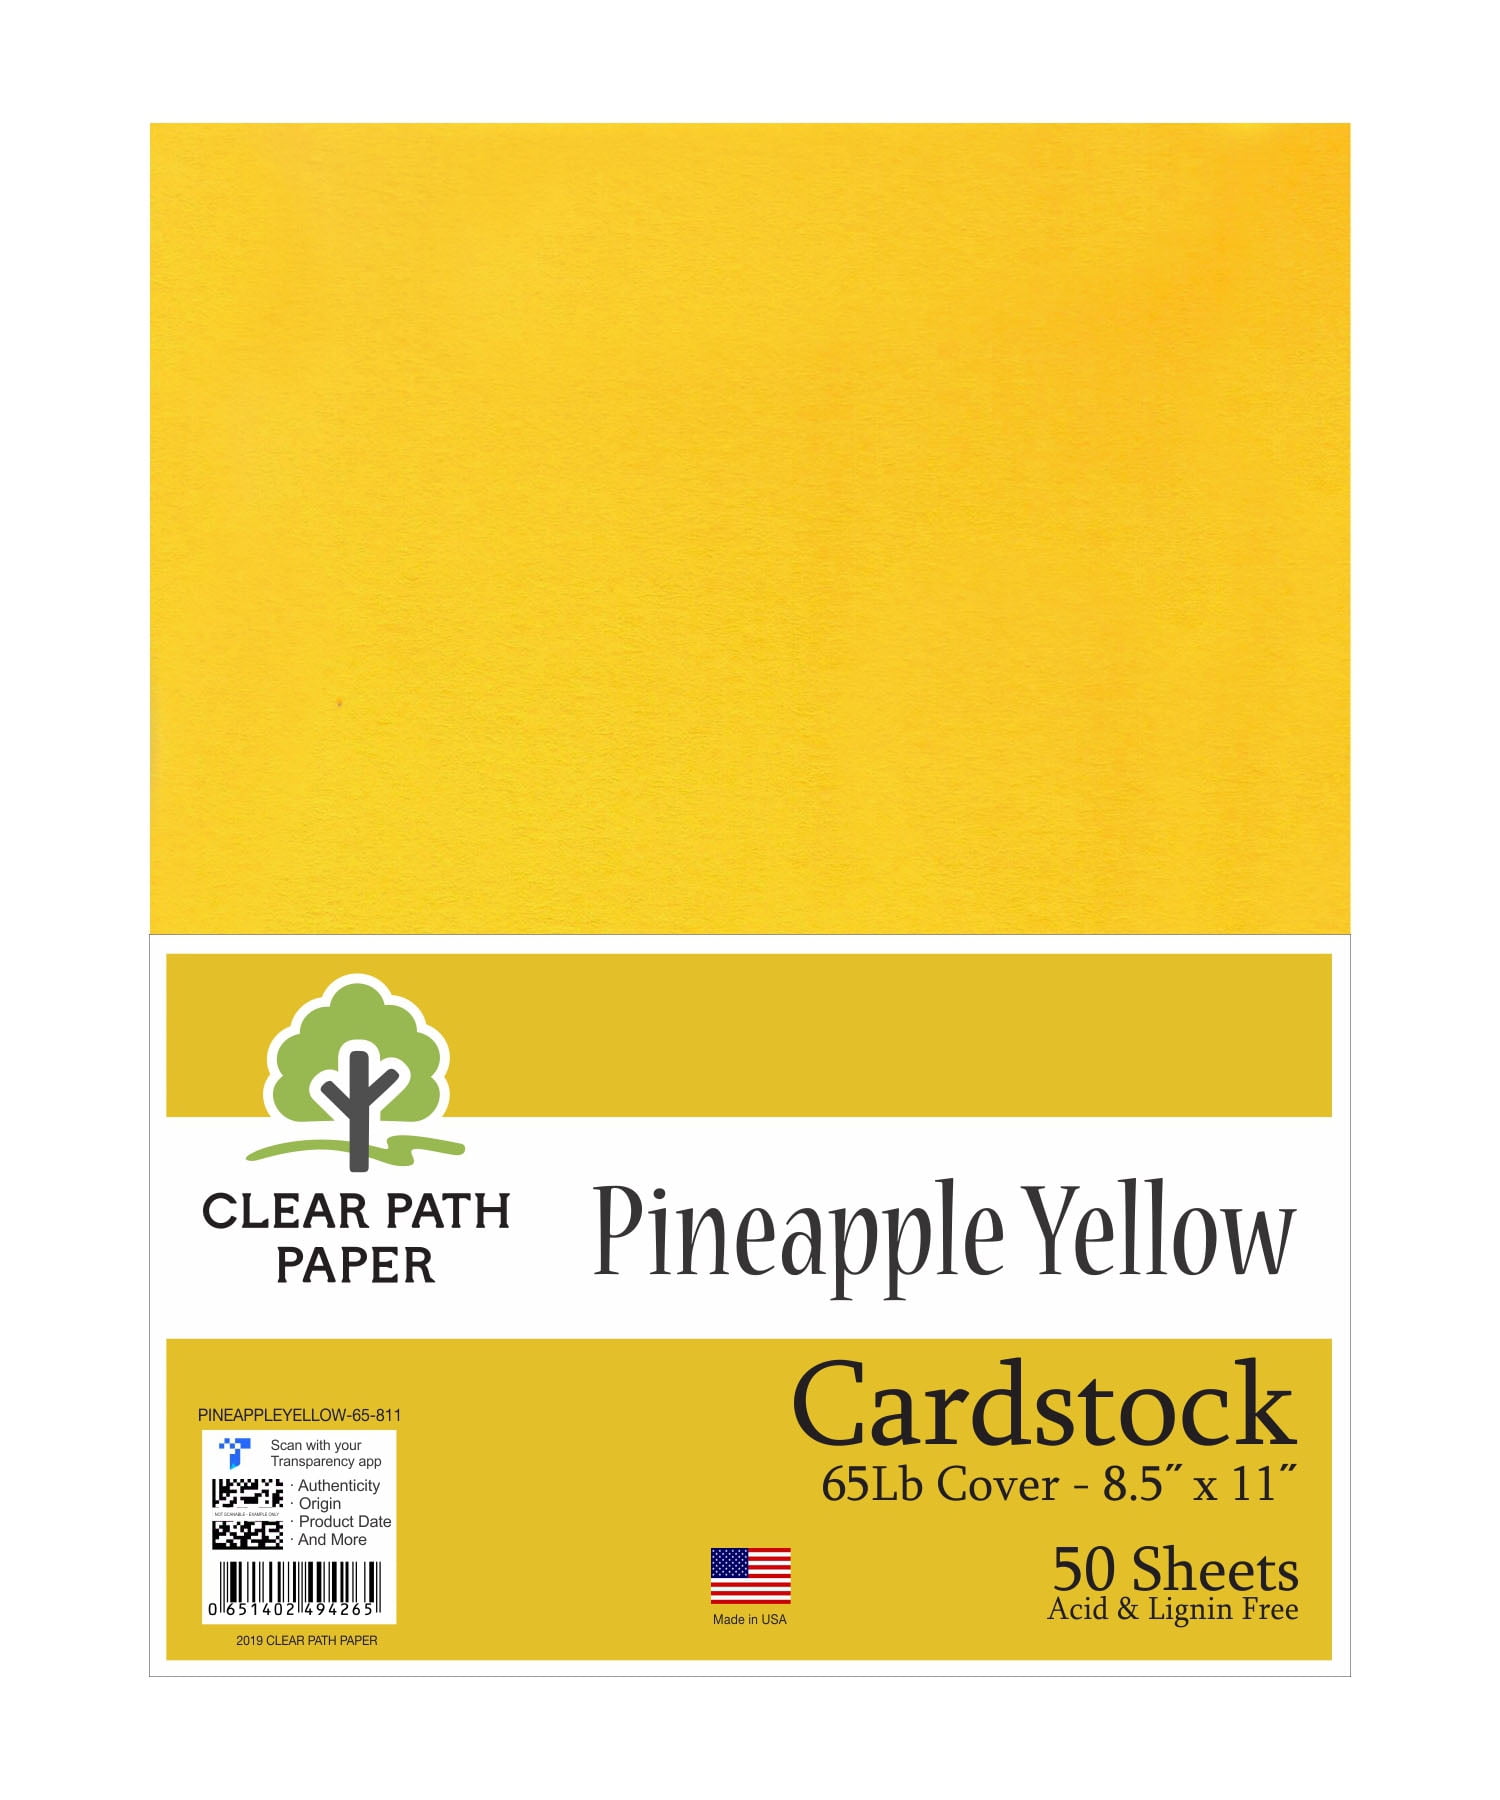 Pineapple Yellow Cardstock - 8.5 x 11 inch - 65Lb Cover - 50 Sheets - Clear  Path Paper 